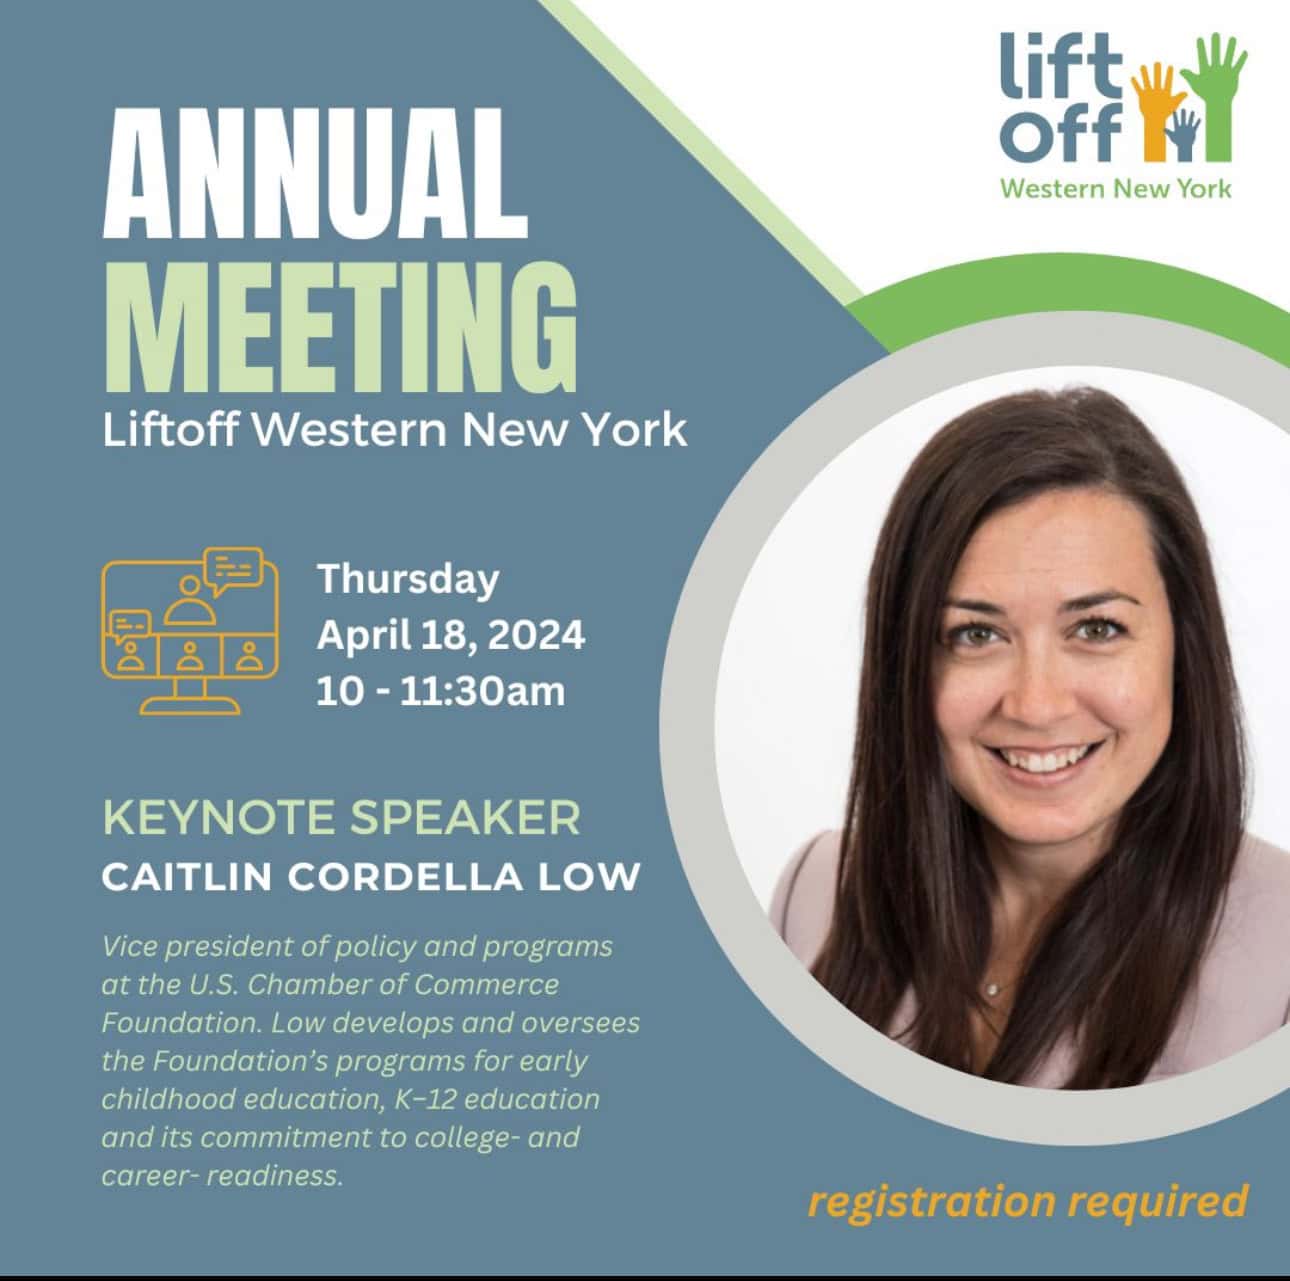 Liftoff 2024 Annual Meeting Keynote featuring Caitlin Cordella Low moderated by Rachel Bonsignore